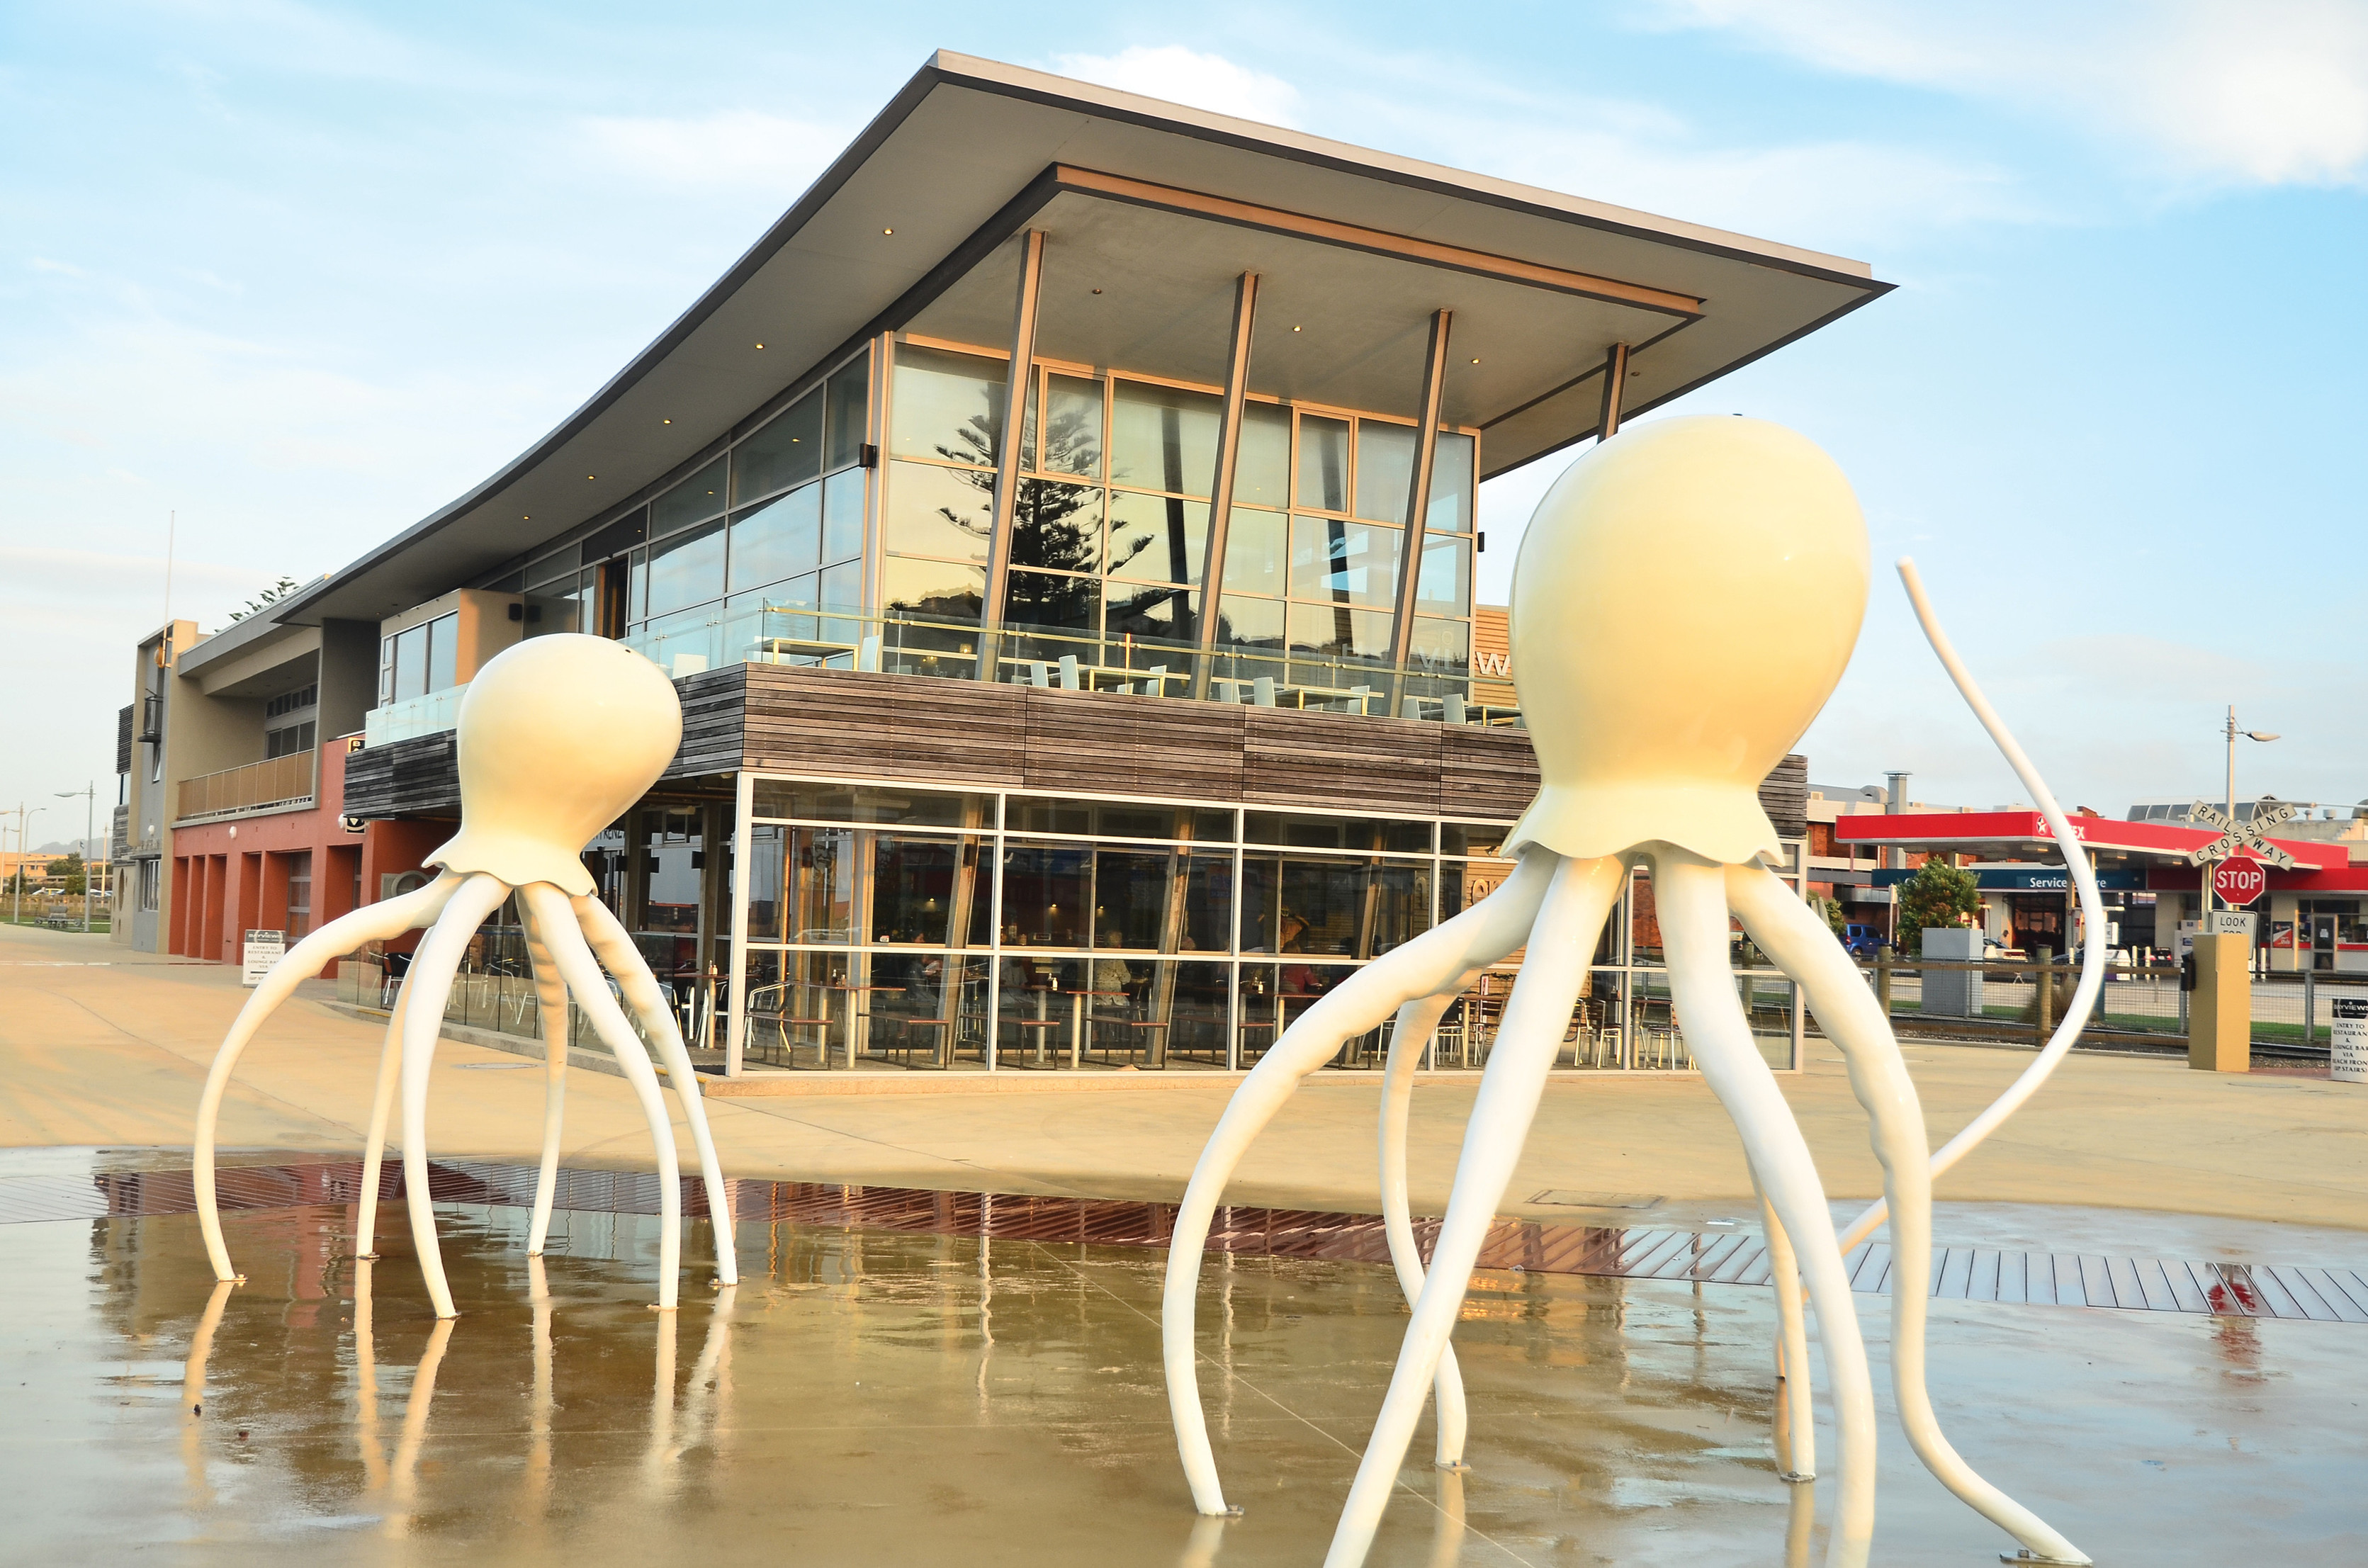 Statues of octopus, standing in front of the.Burnie Surf Club.